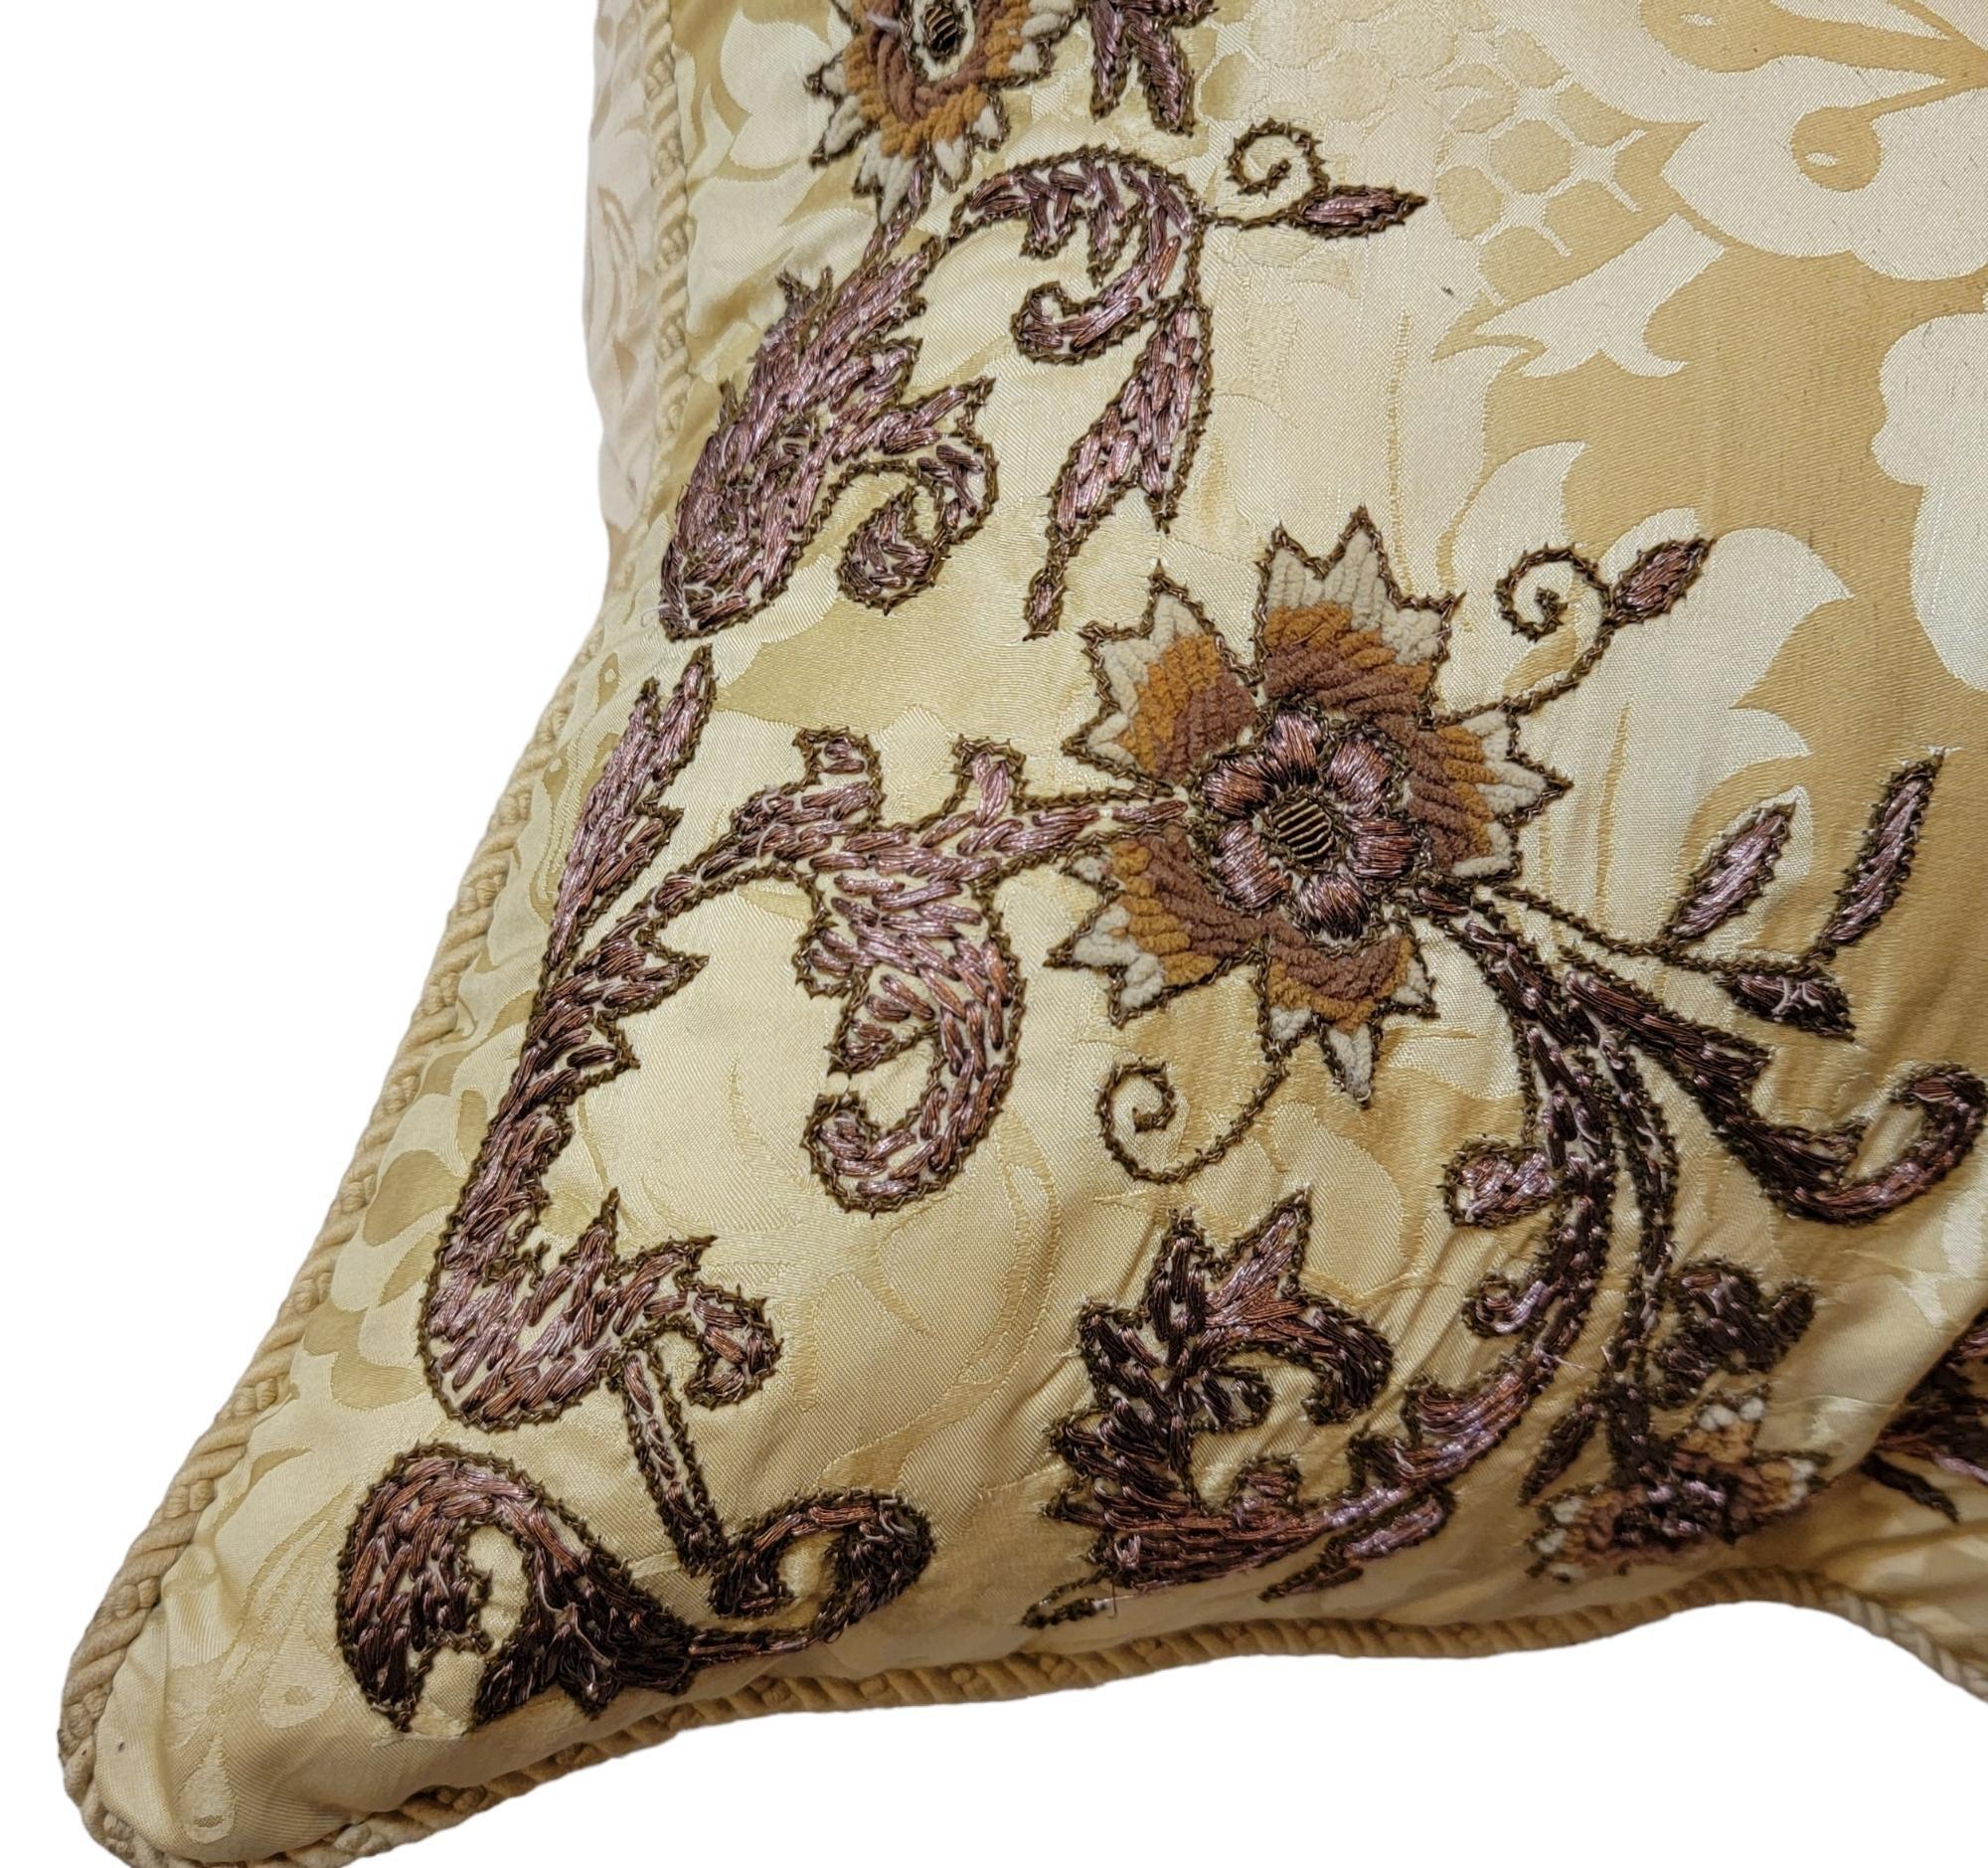 Hand Sewn Floral pillow with copper wire sewn throughout the pillow. The pillow has spots of cotton that outline the floral pattern and the maker has sewn copper wire into the decoration. The copper is limited to the interior of the outline. The